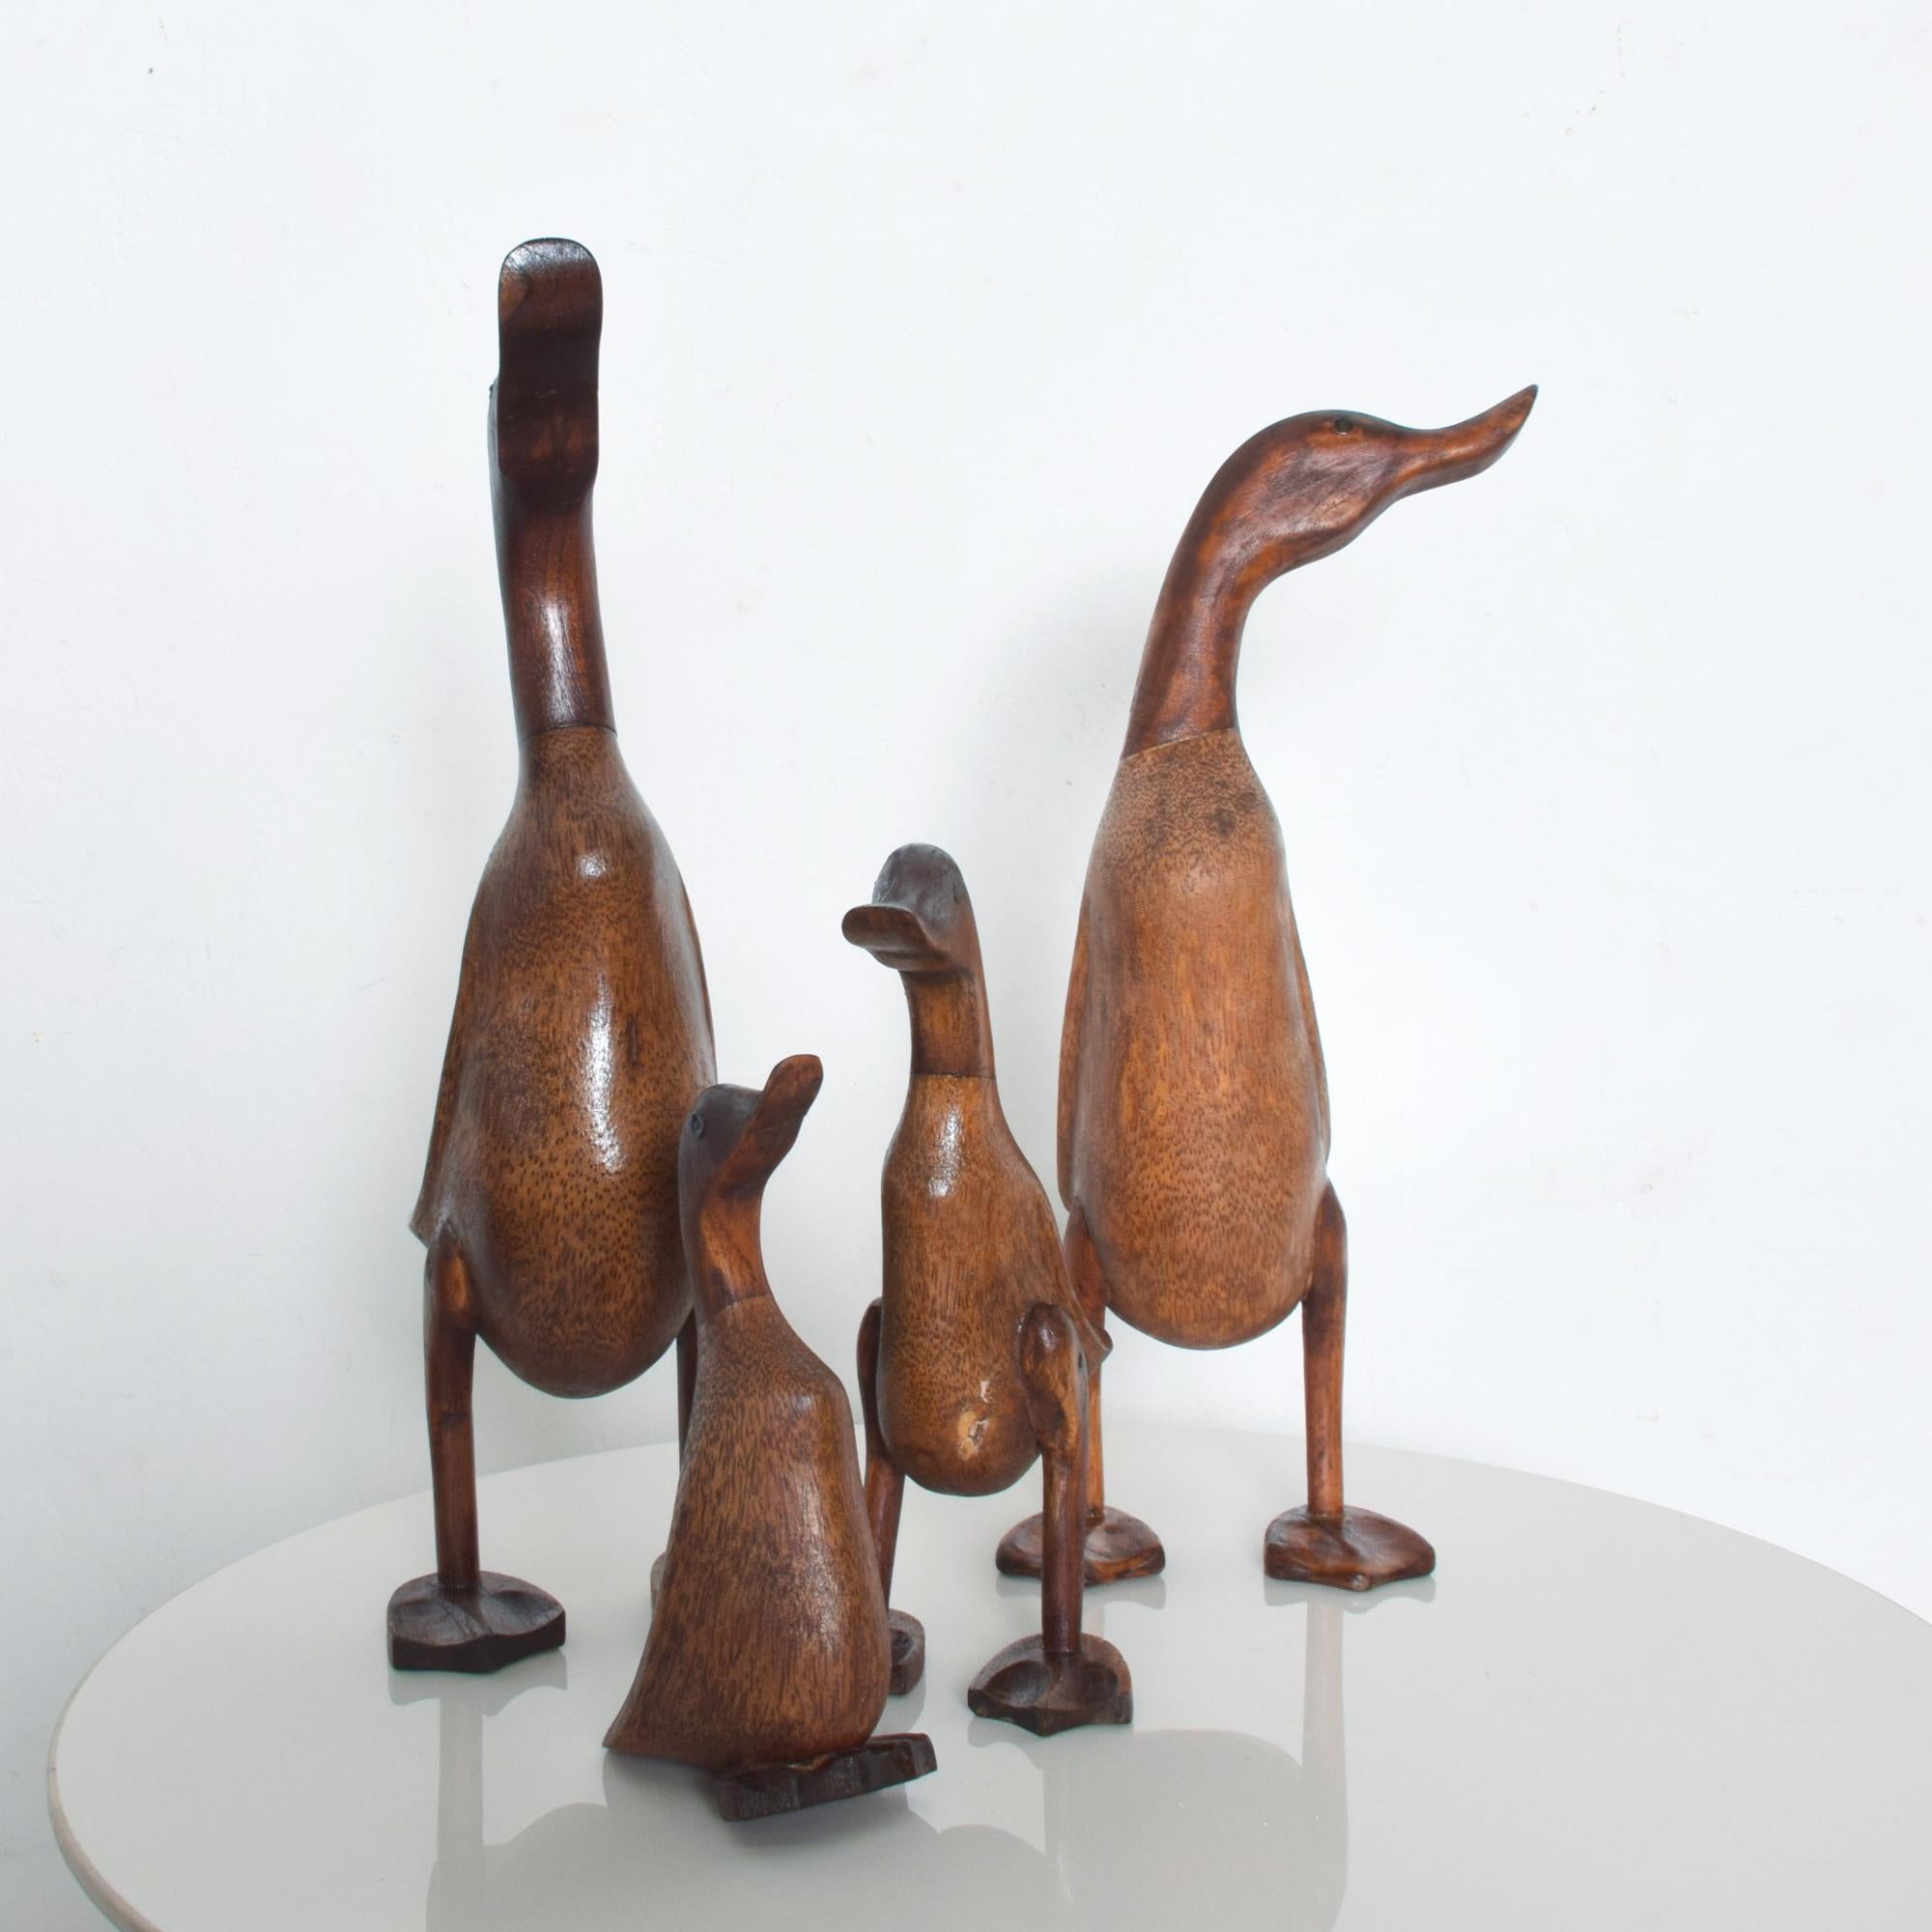 Mid-Century Modern Duck Dynasty USA family of four standing hand carved wood ducks and ducklings statues circa 1950s
Displays beautifully, warm and elegant wood grain. Set includes four wooden ducks.
Unknown information on maker. No stamp